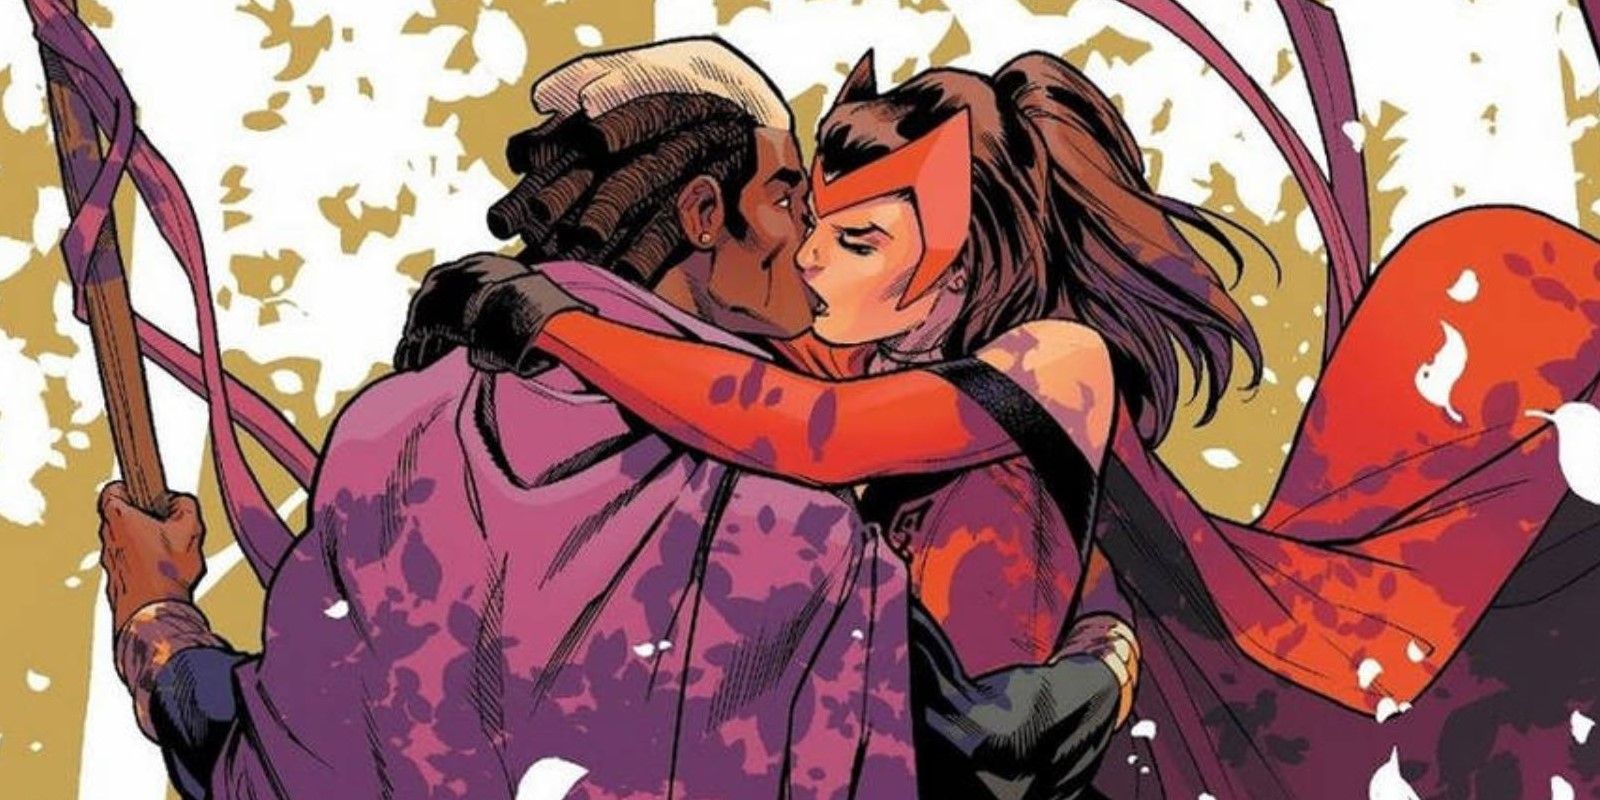 Scarlet Witch and Brother Voodoo kissing in Marvel Comics